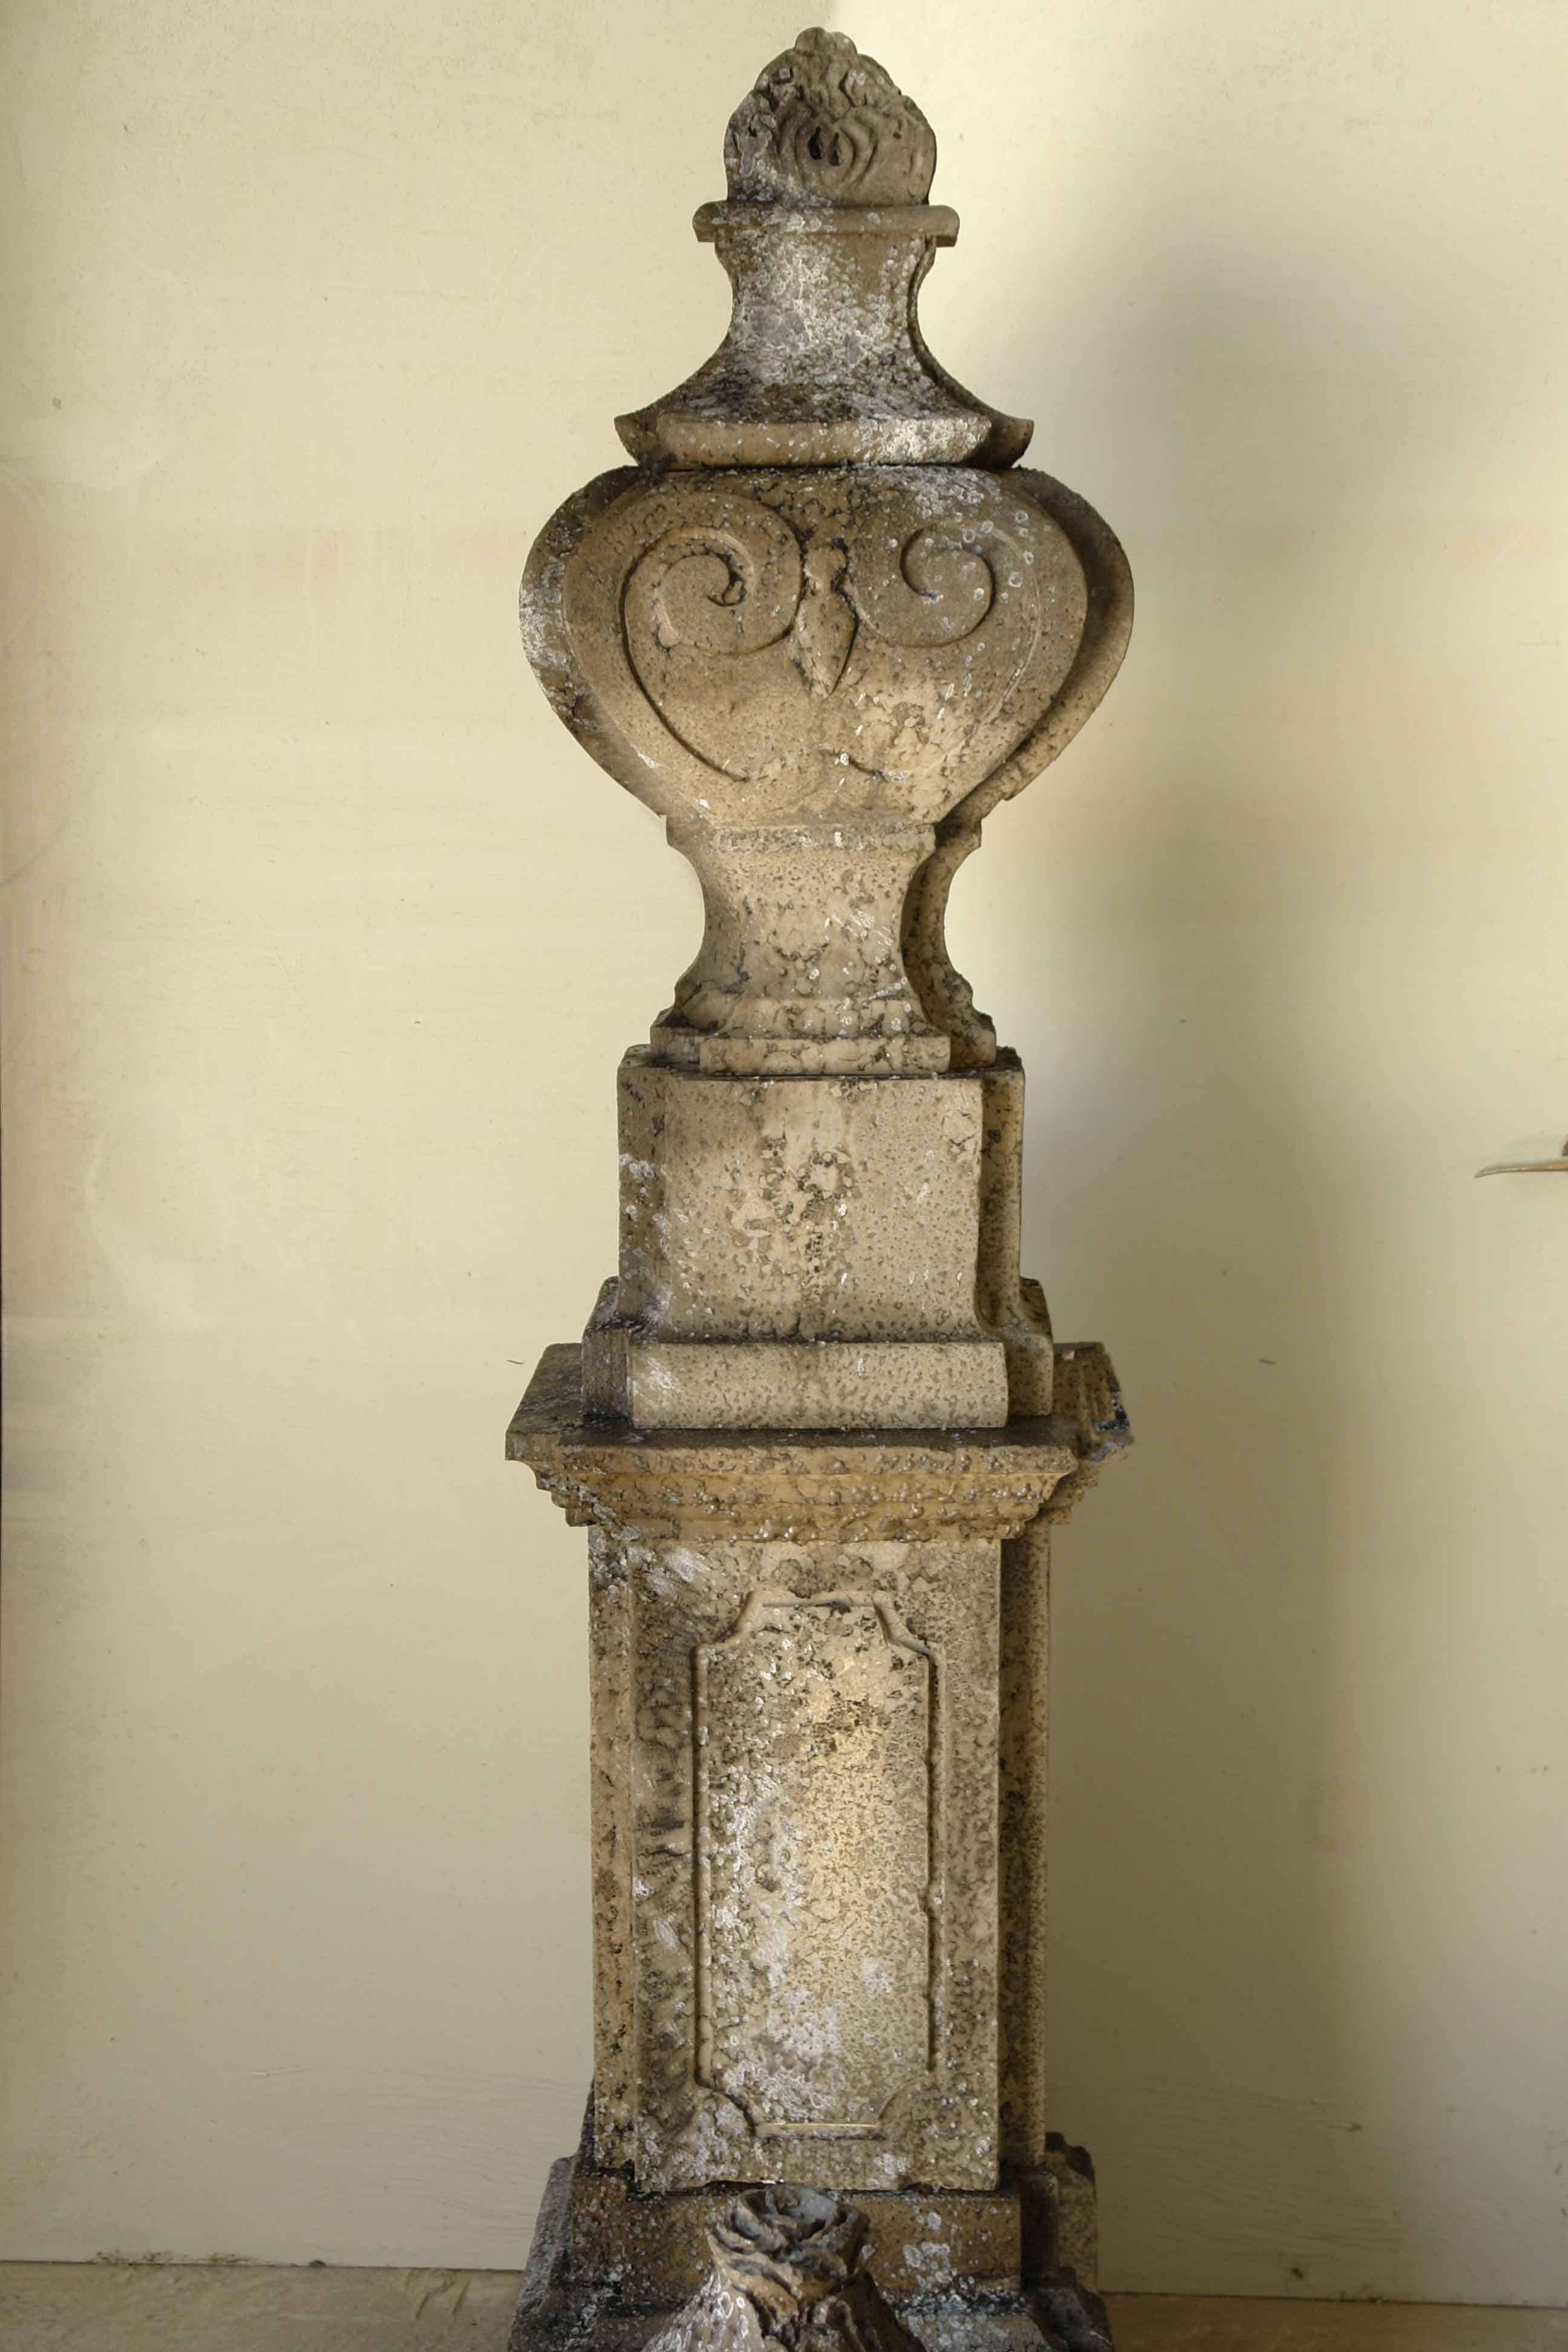 A pair of Louis XV style urns and pedestals, hand-carved in pure limestone from France.
Excellent quality of Art work, Louis XV sculptures on the front and sides of the urns dit 